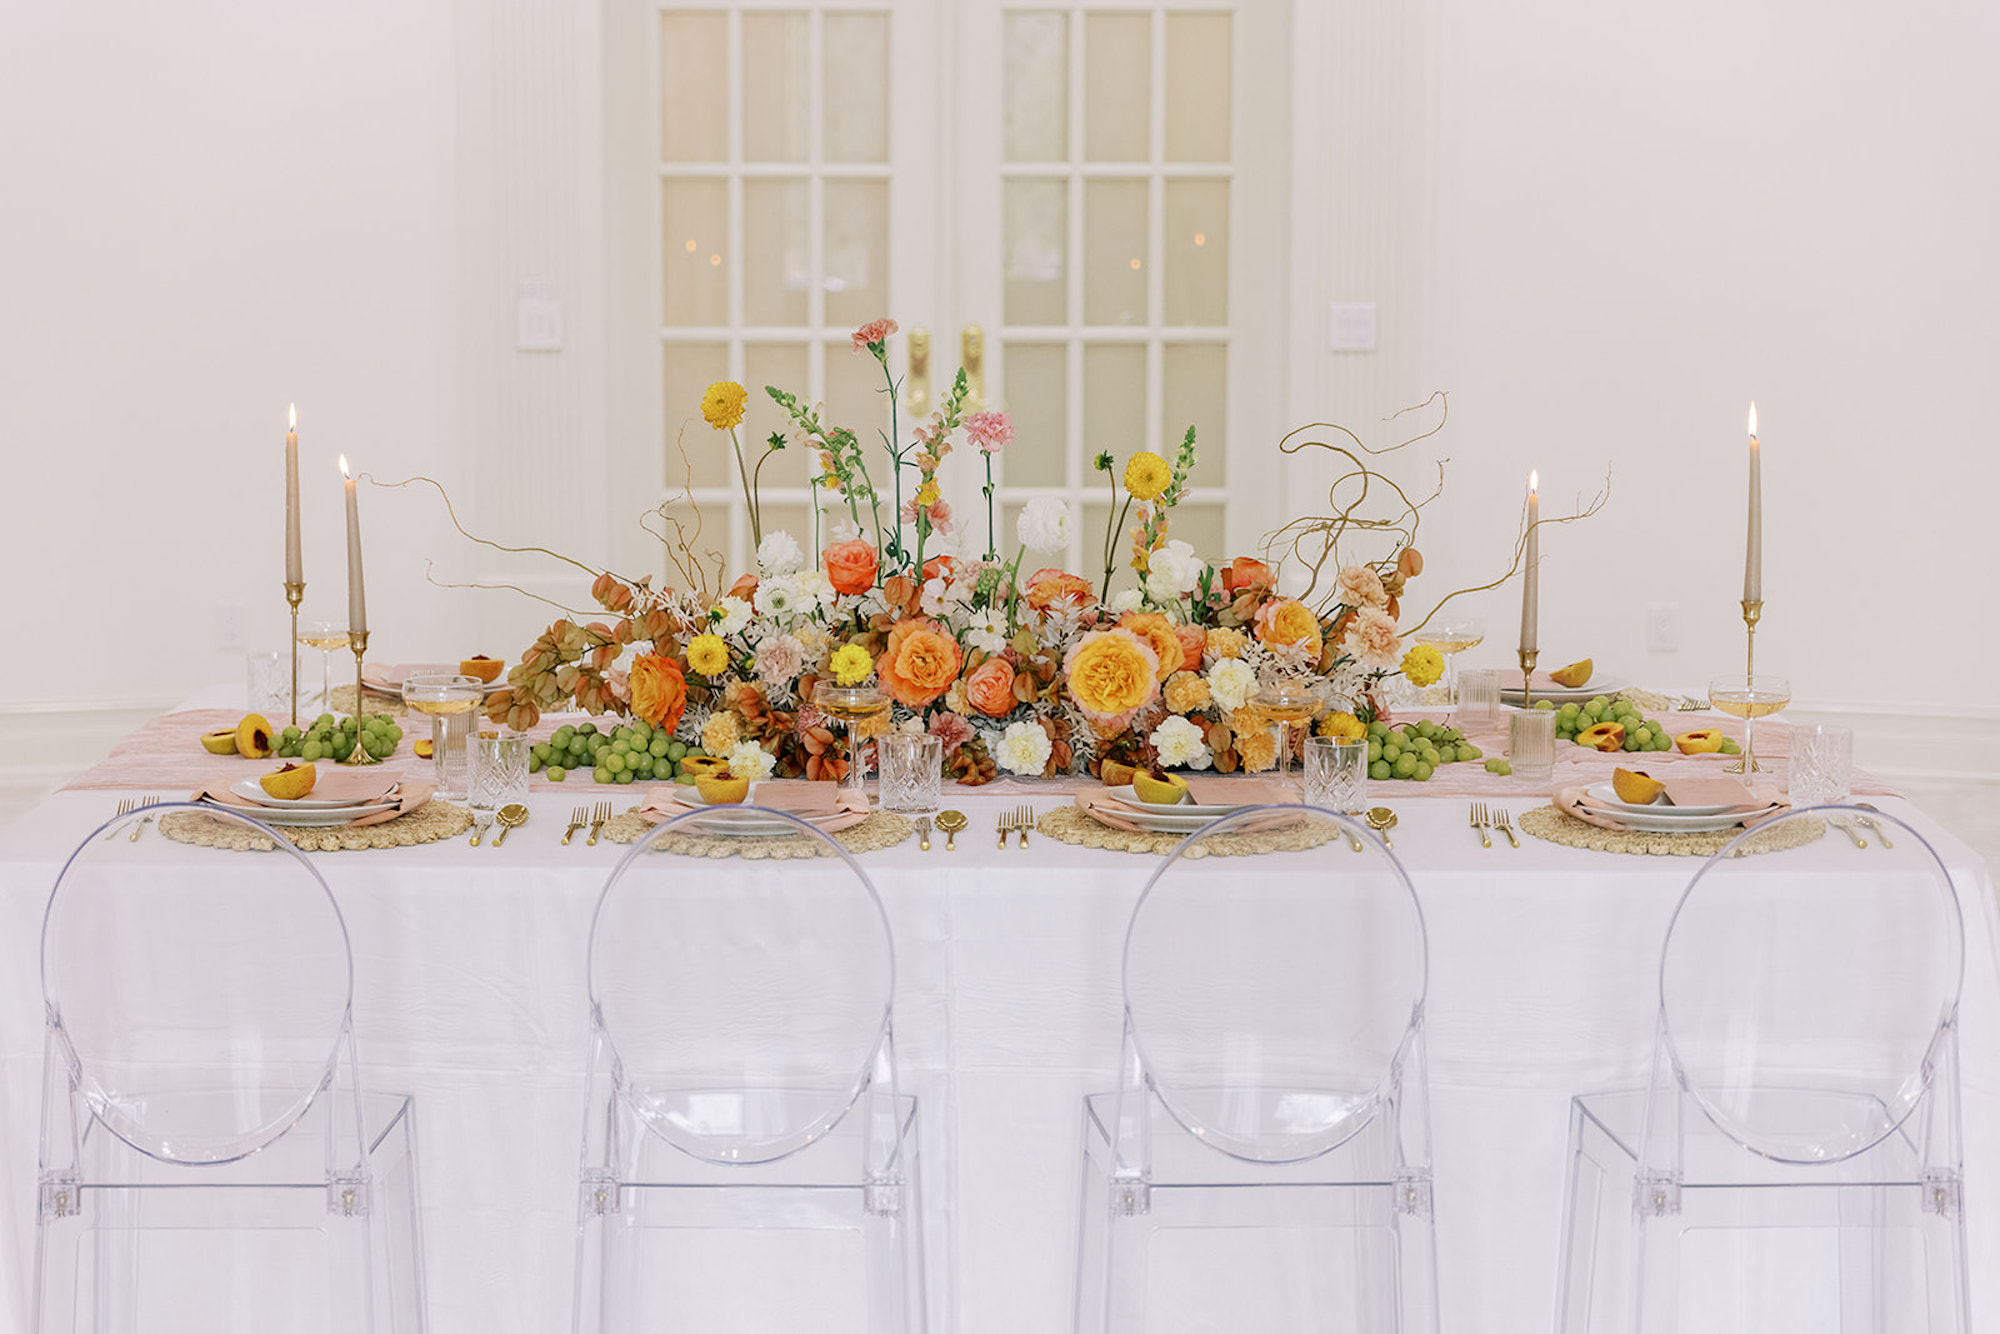 Romantic, Spring-Inspired White, Orange, Yellow, Peach Rose, Dahlias, and Carnation Centerpiece Ideas | Taper Candle with Gold Holder Wedding Reception Inspiration | Ghost Chair Seating